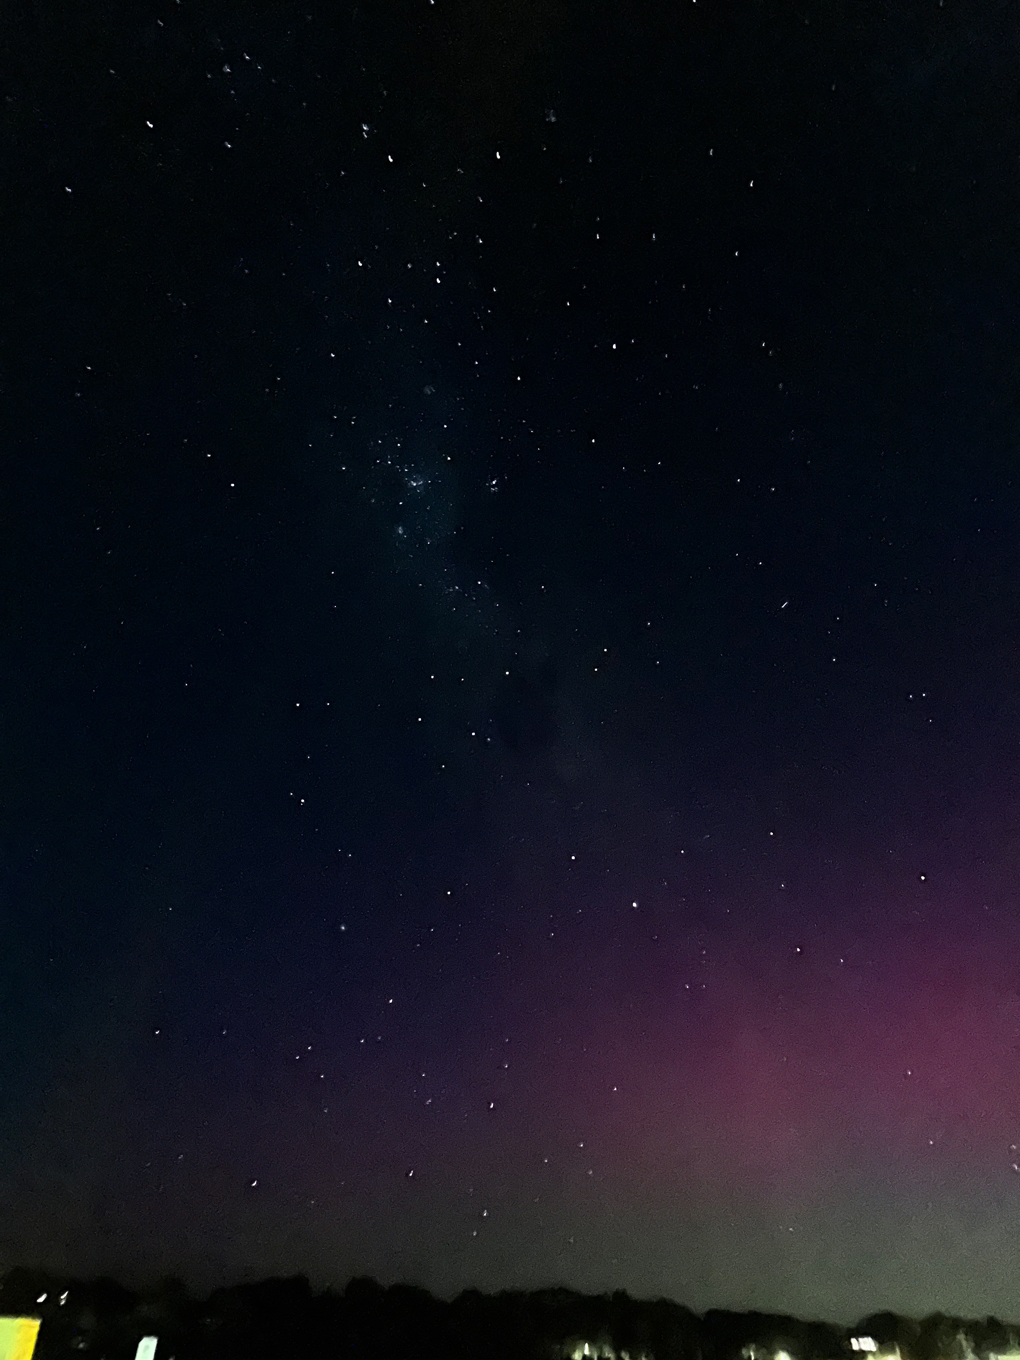 Stars clustering in a band vertically. The Milky Way. Bottom right is a red and green haze, the Aurora Australis. Some building in the distance with lights on at the bottom.